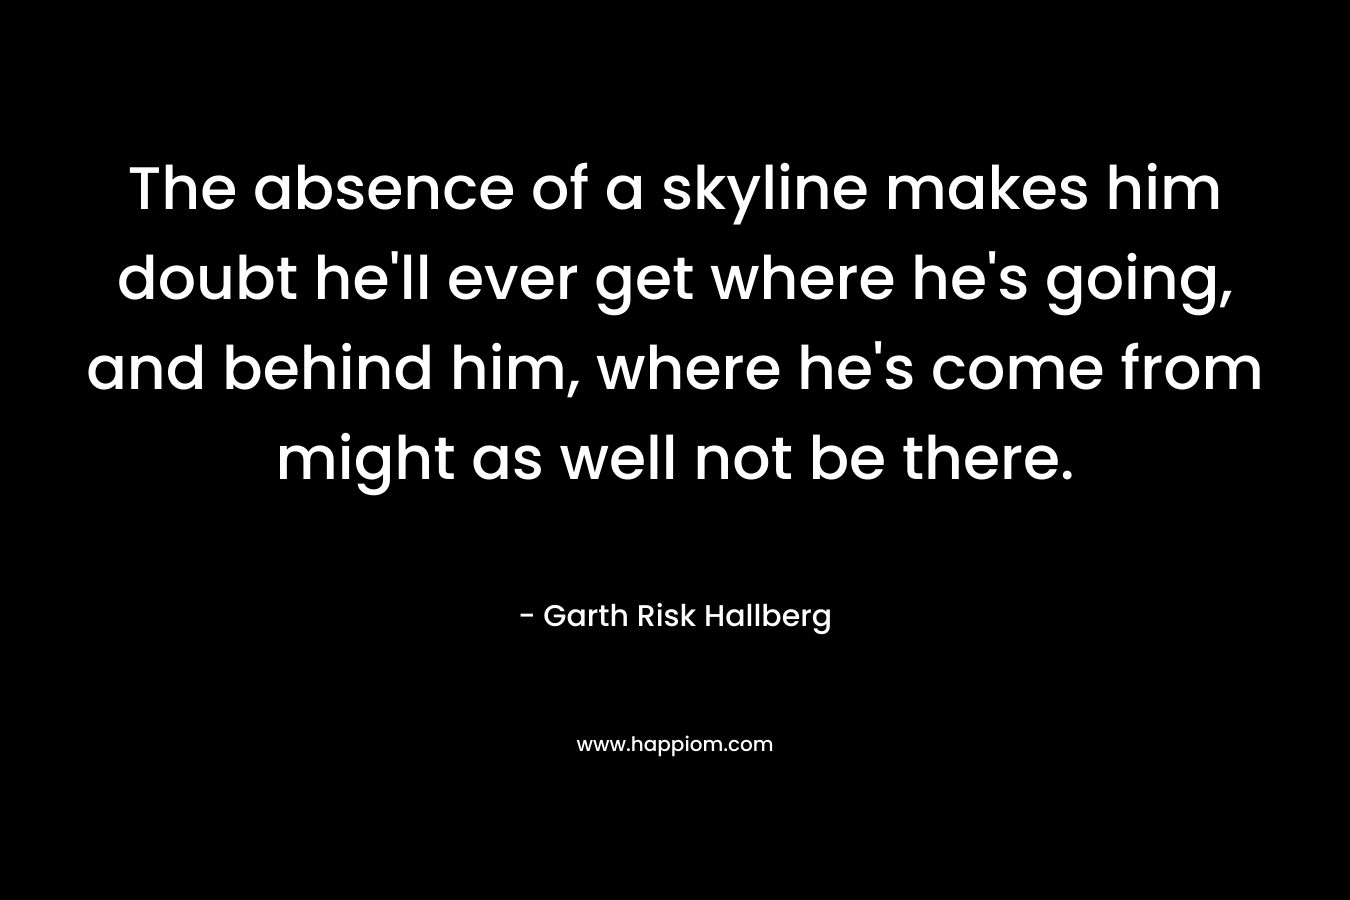 The absence of a skyline makes him doubt he’ll ever get where he’s going, and behind him, where he’s come from might as well not be there. – Garth Risk Hallberg